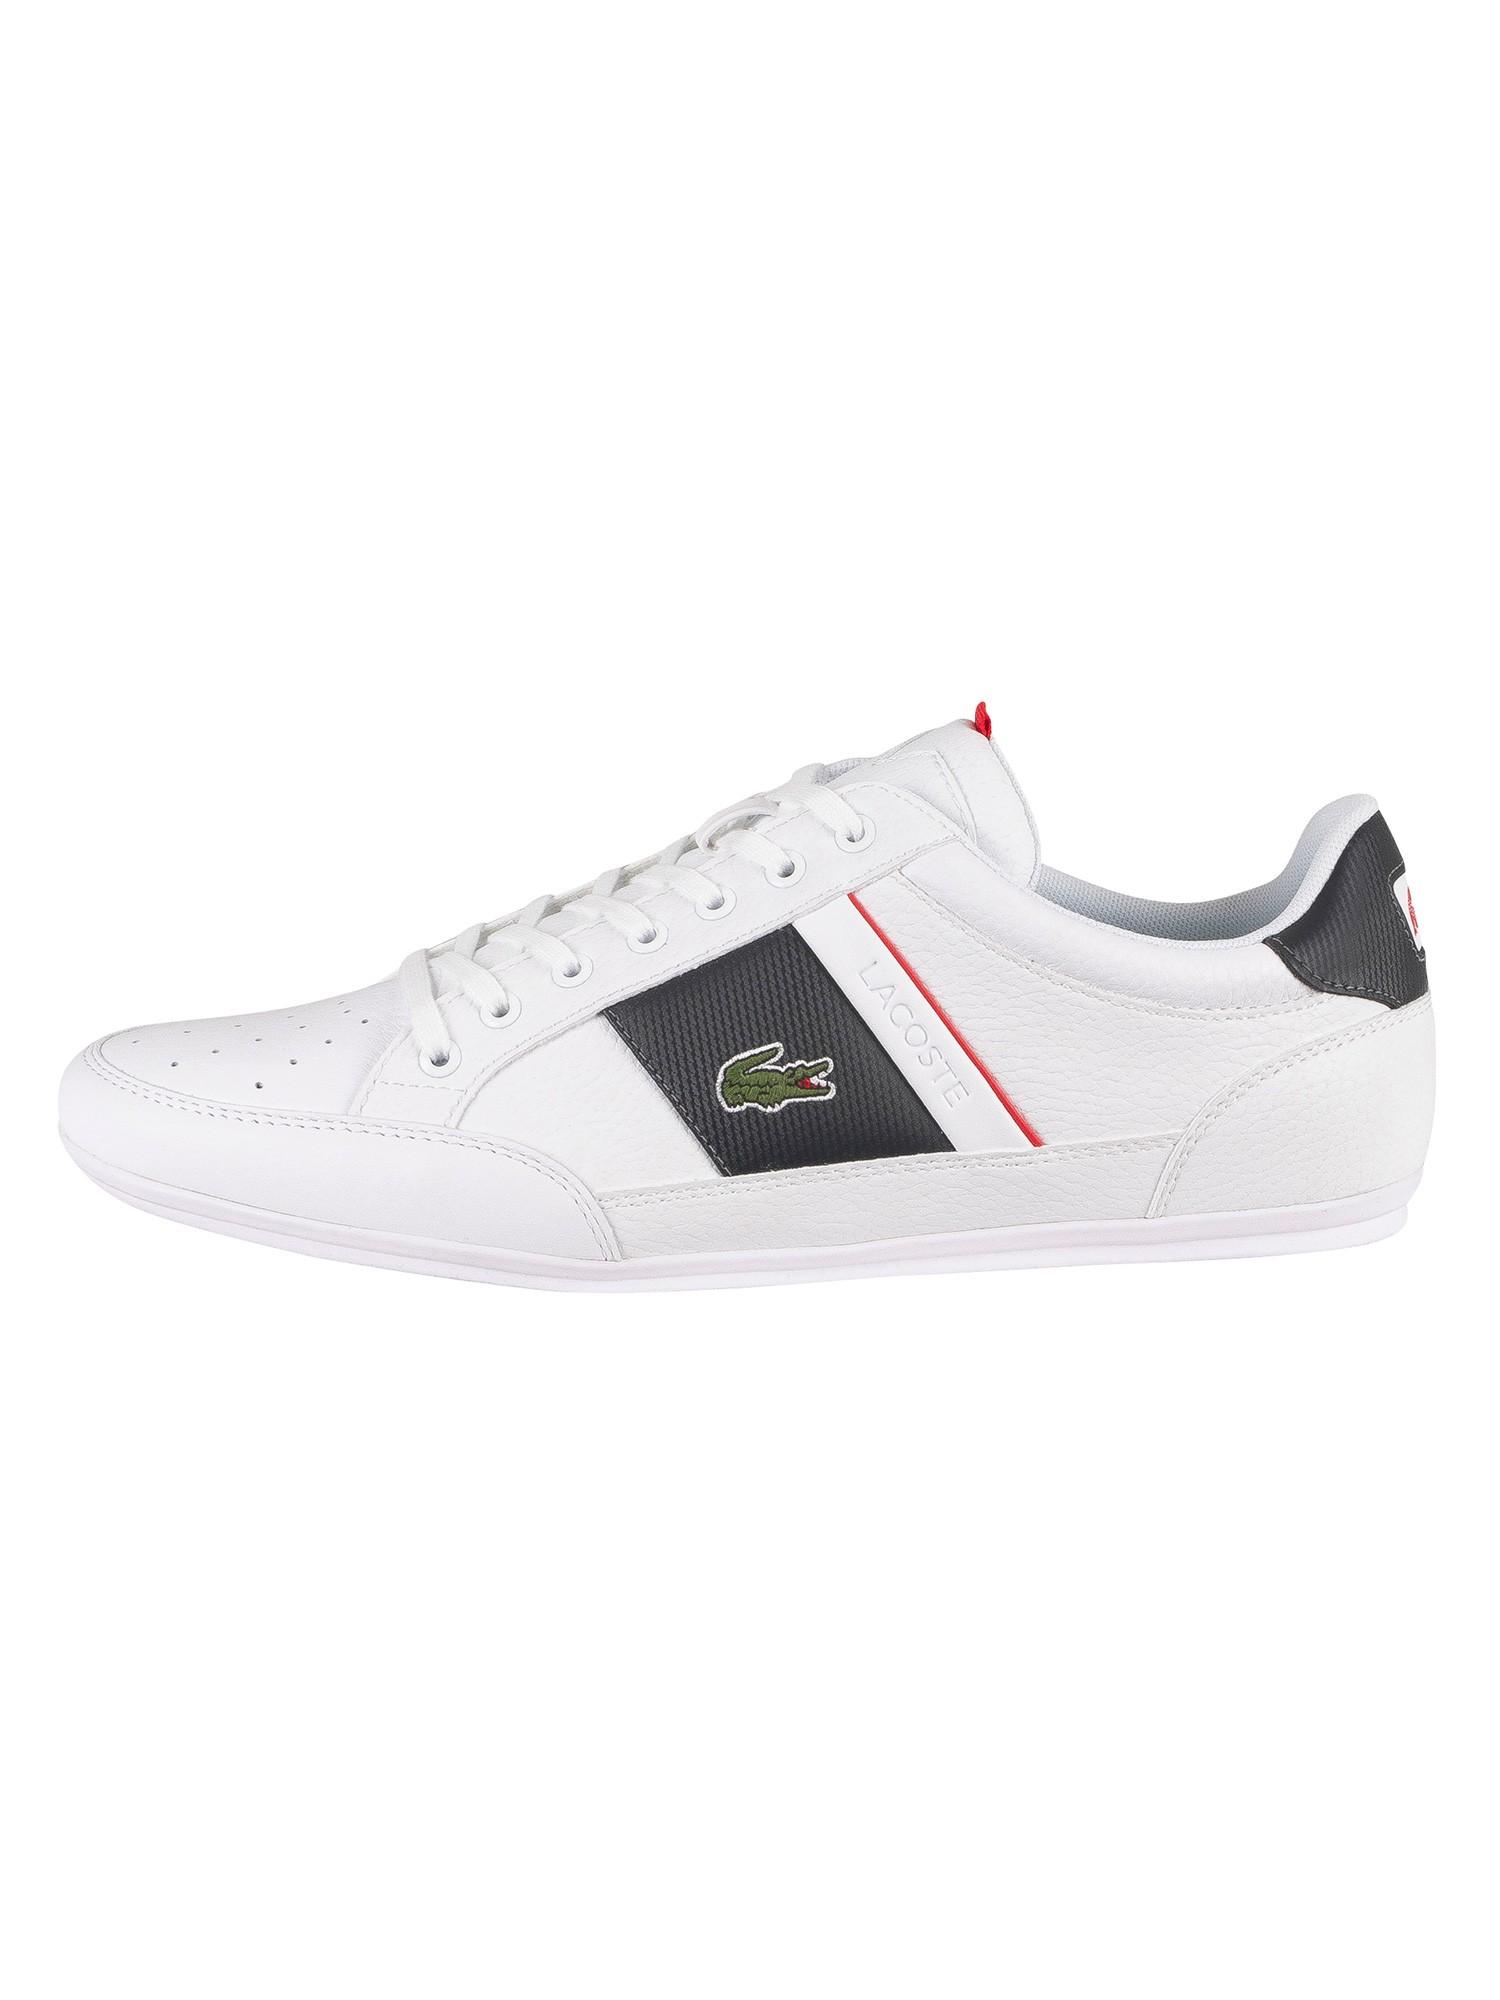 Lacoste Chaymon 0721 1 Cma Synthetic Leather Trainers in White Men | Lyst